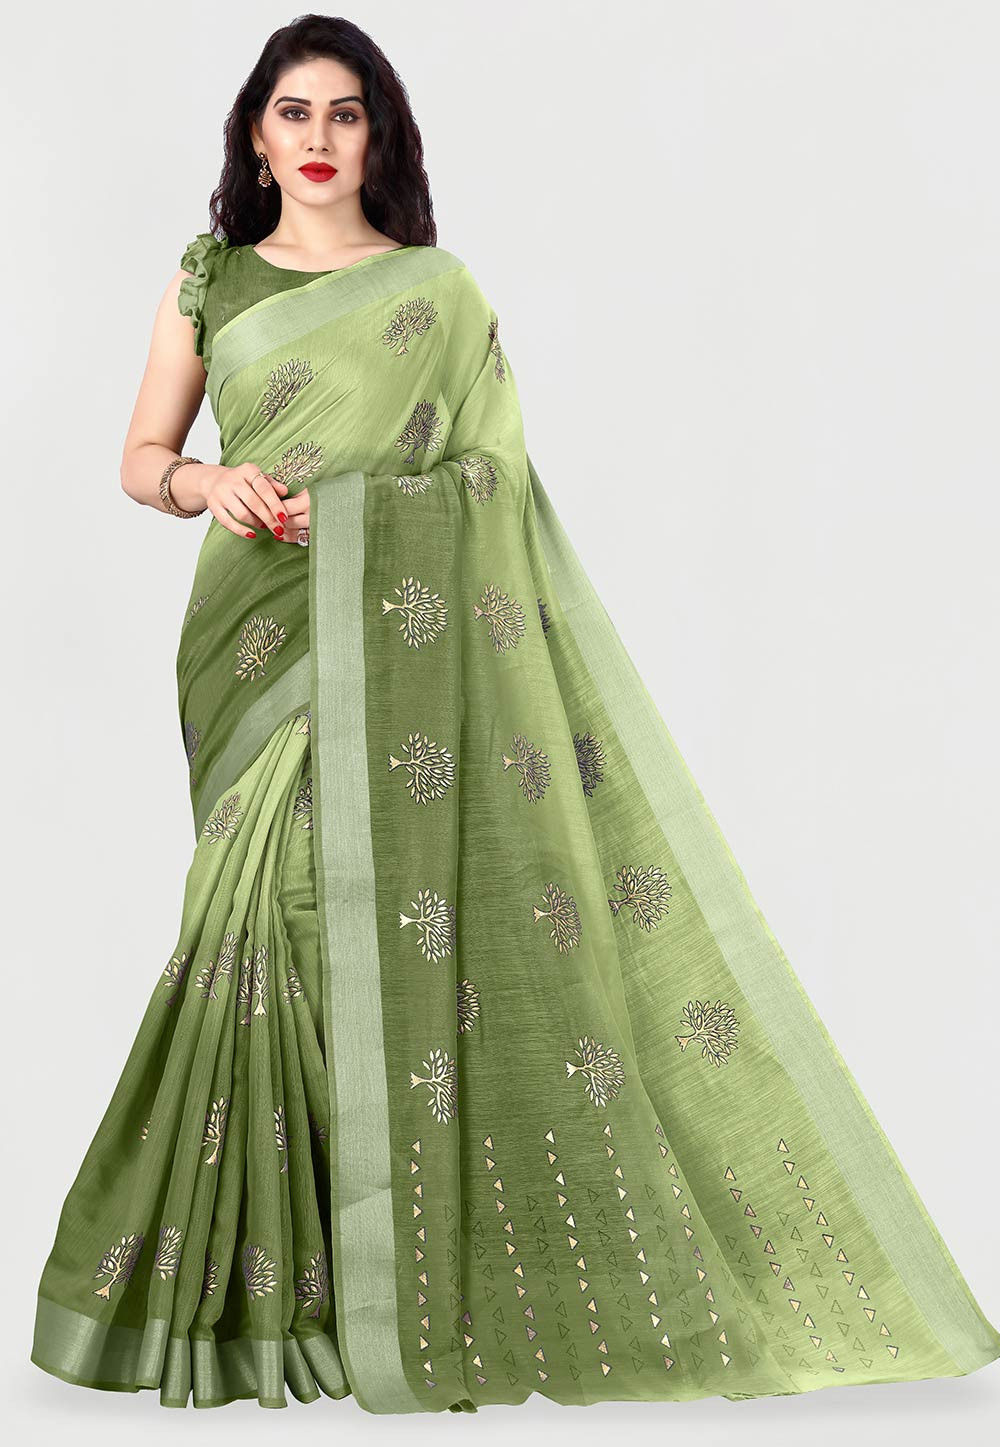 Foil Printed Cotton Saree in Shaded Green : SBH2023